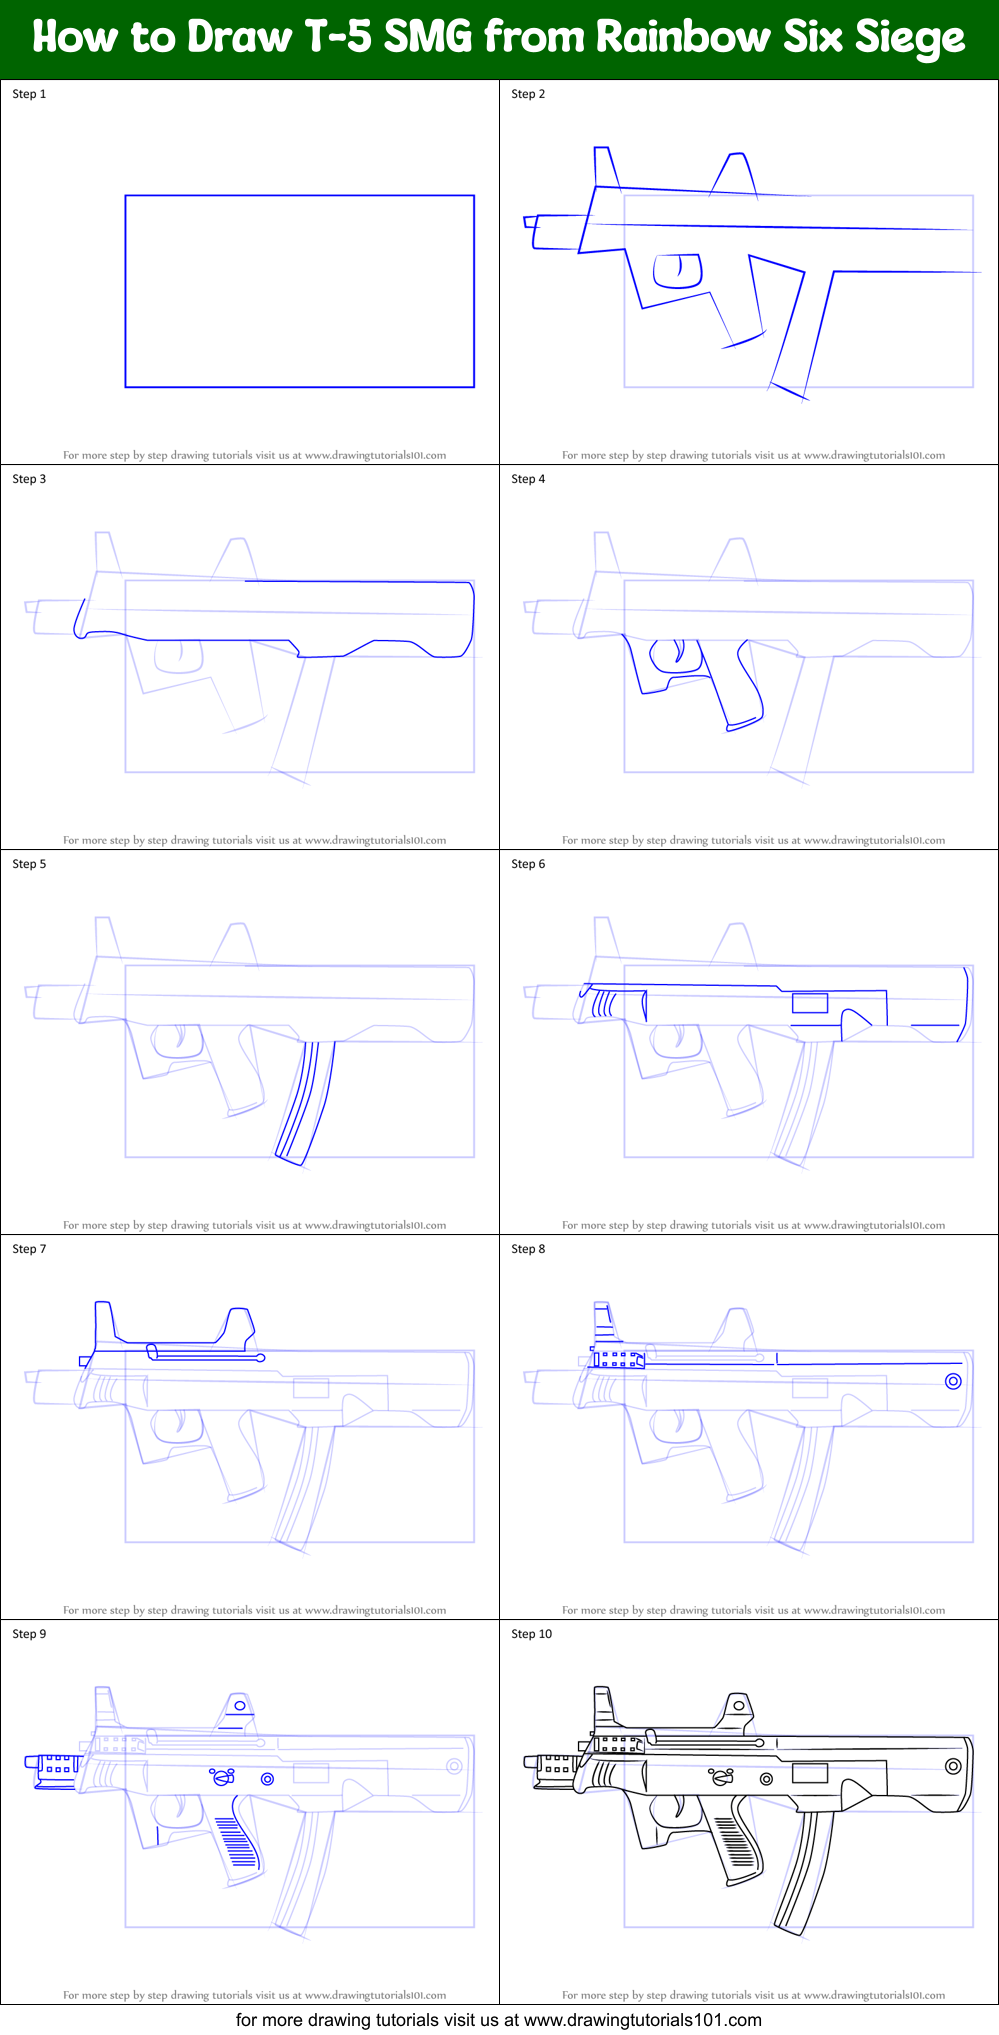 how-to-draw-t-5-smg-from-rainbow-six-siege-printable-step-by-step